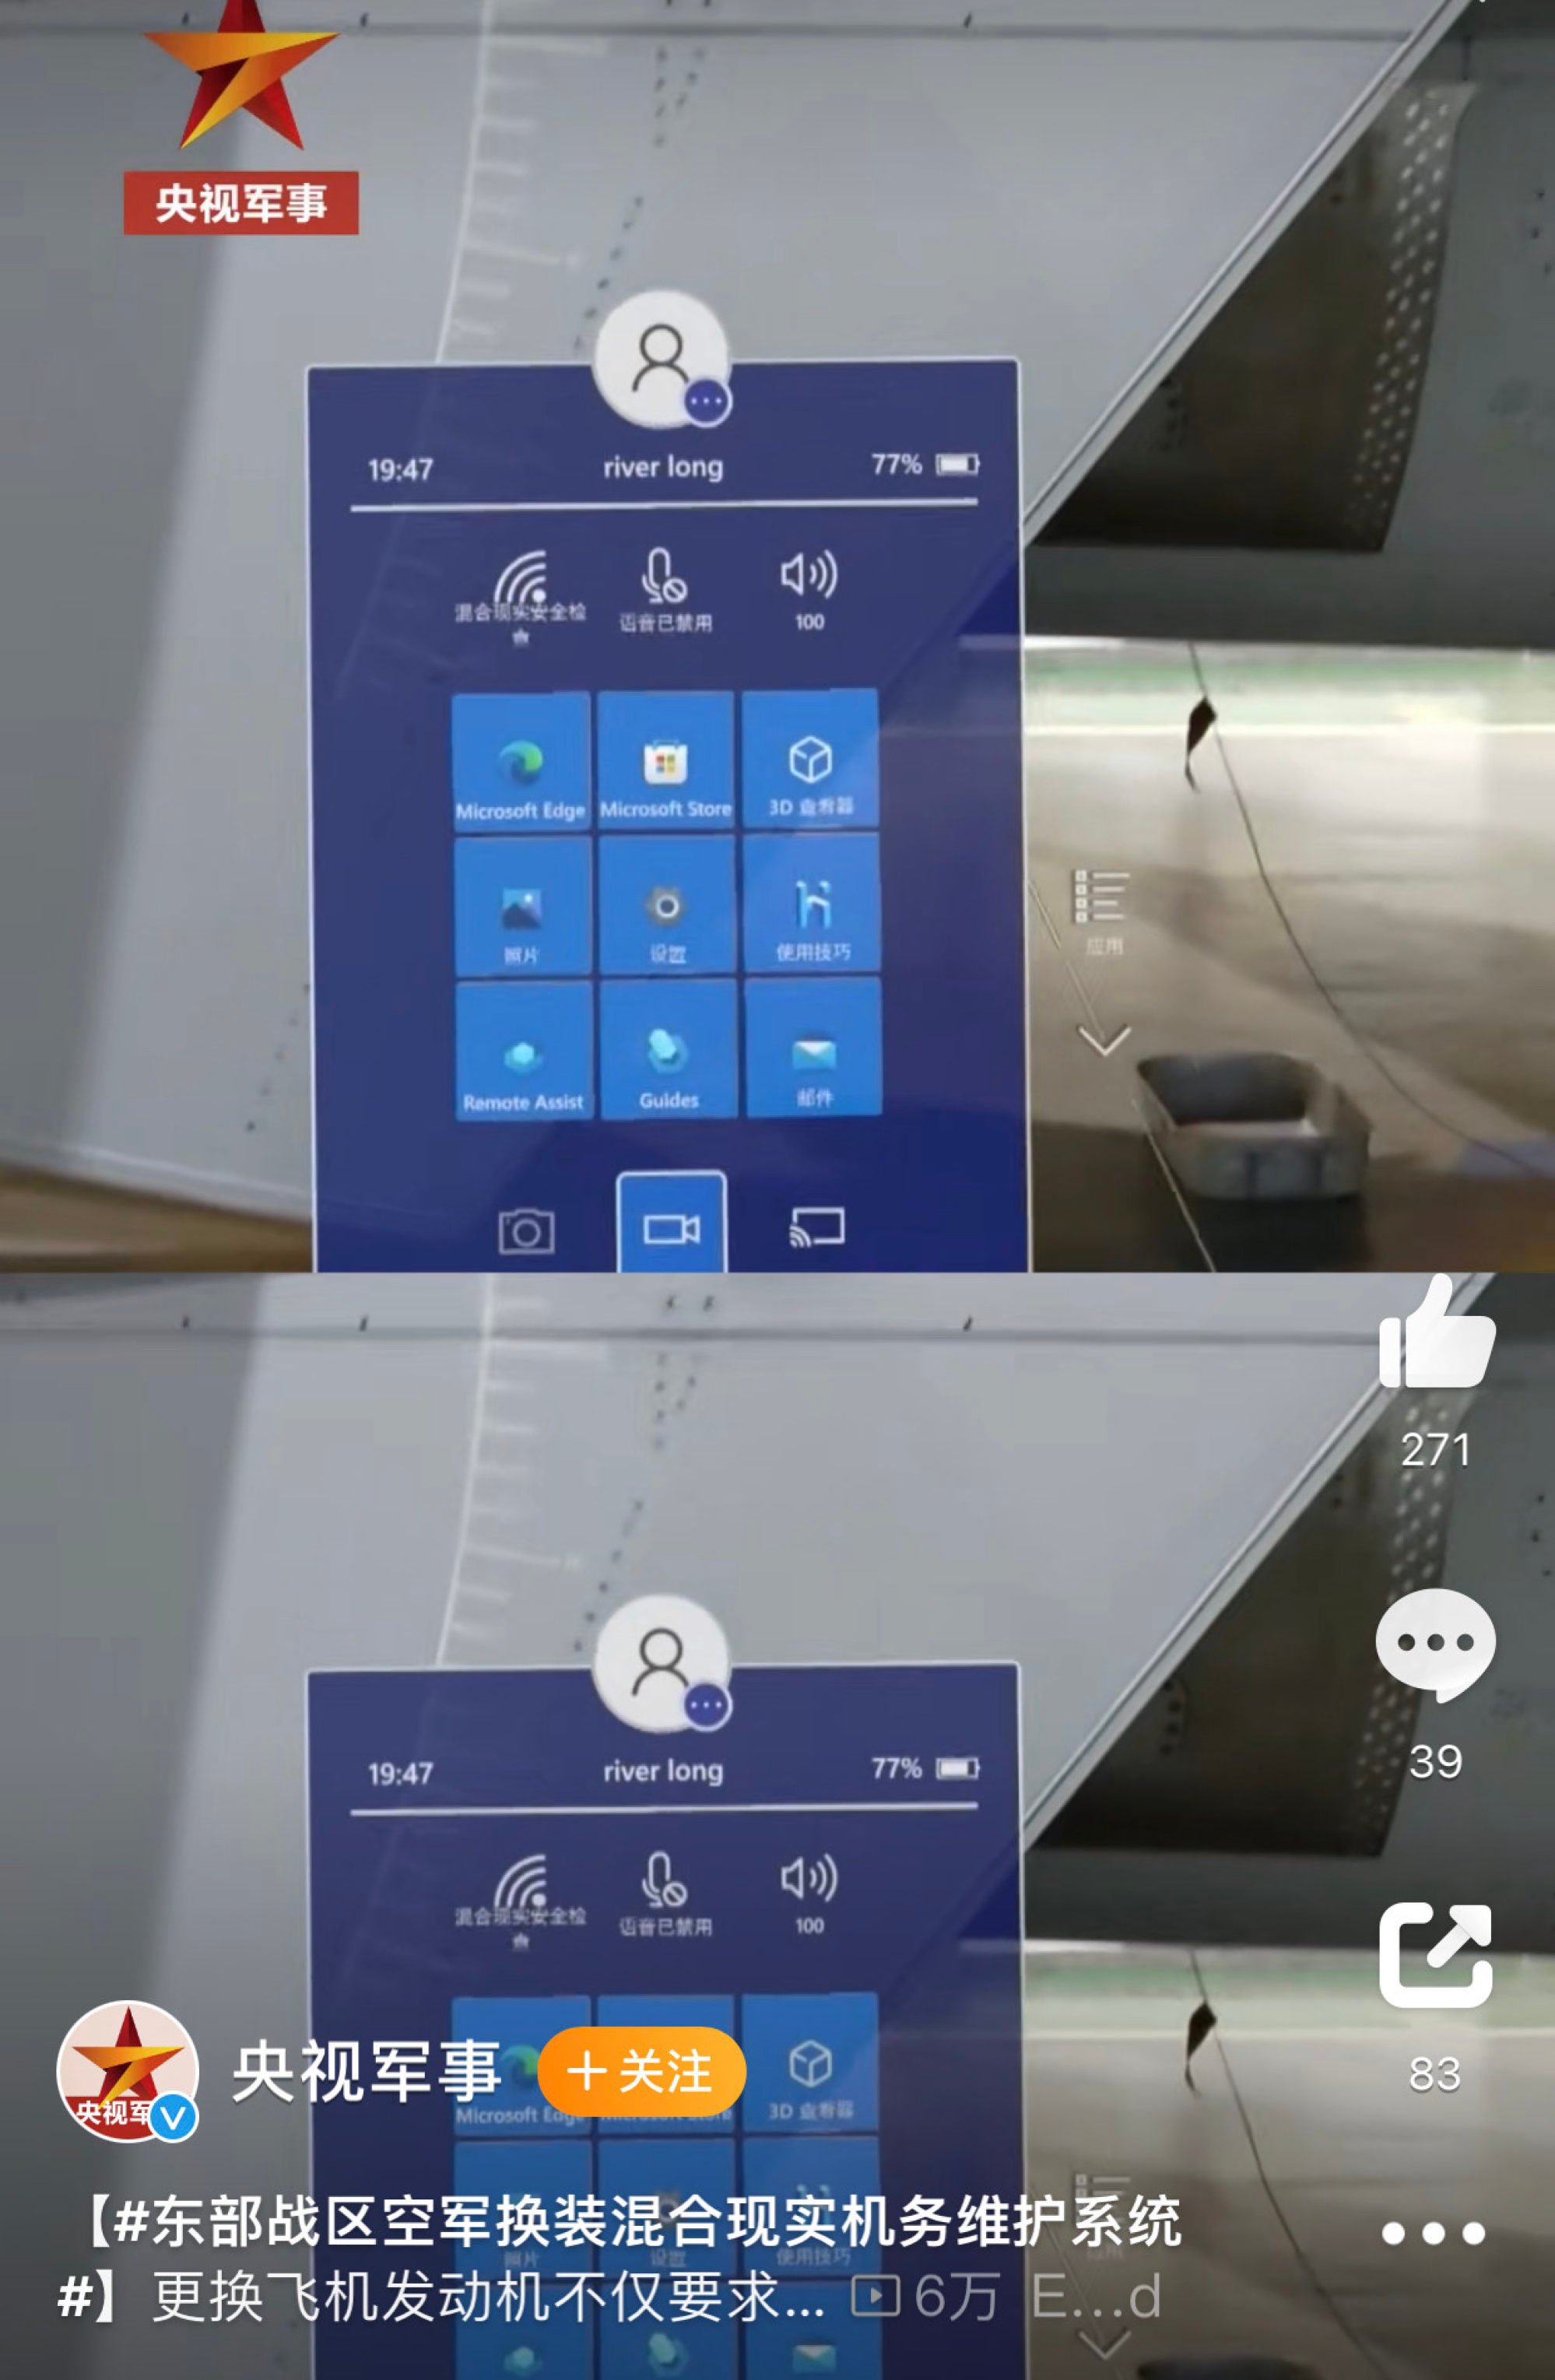 The video clip shows a 3D hologram of an interface with Microsoft apps. Photo: Weibo / CCTV Military Channel